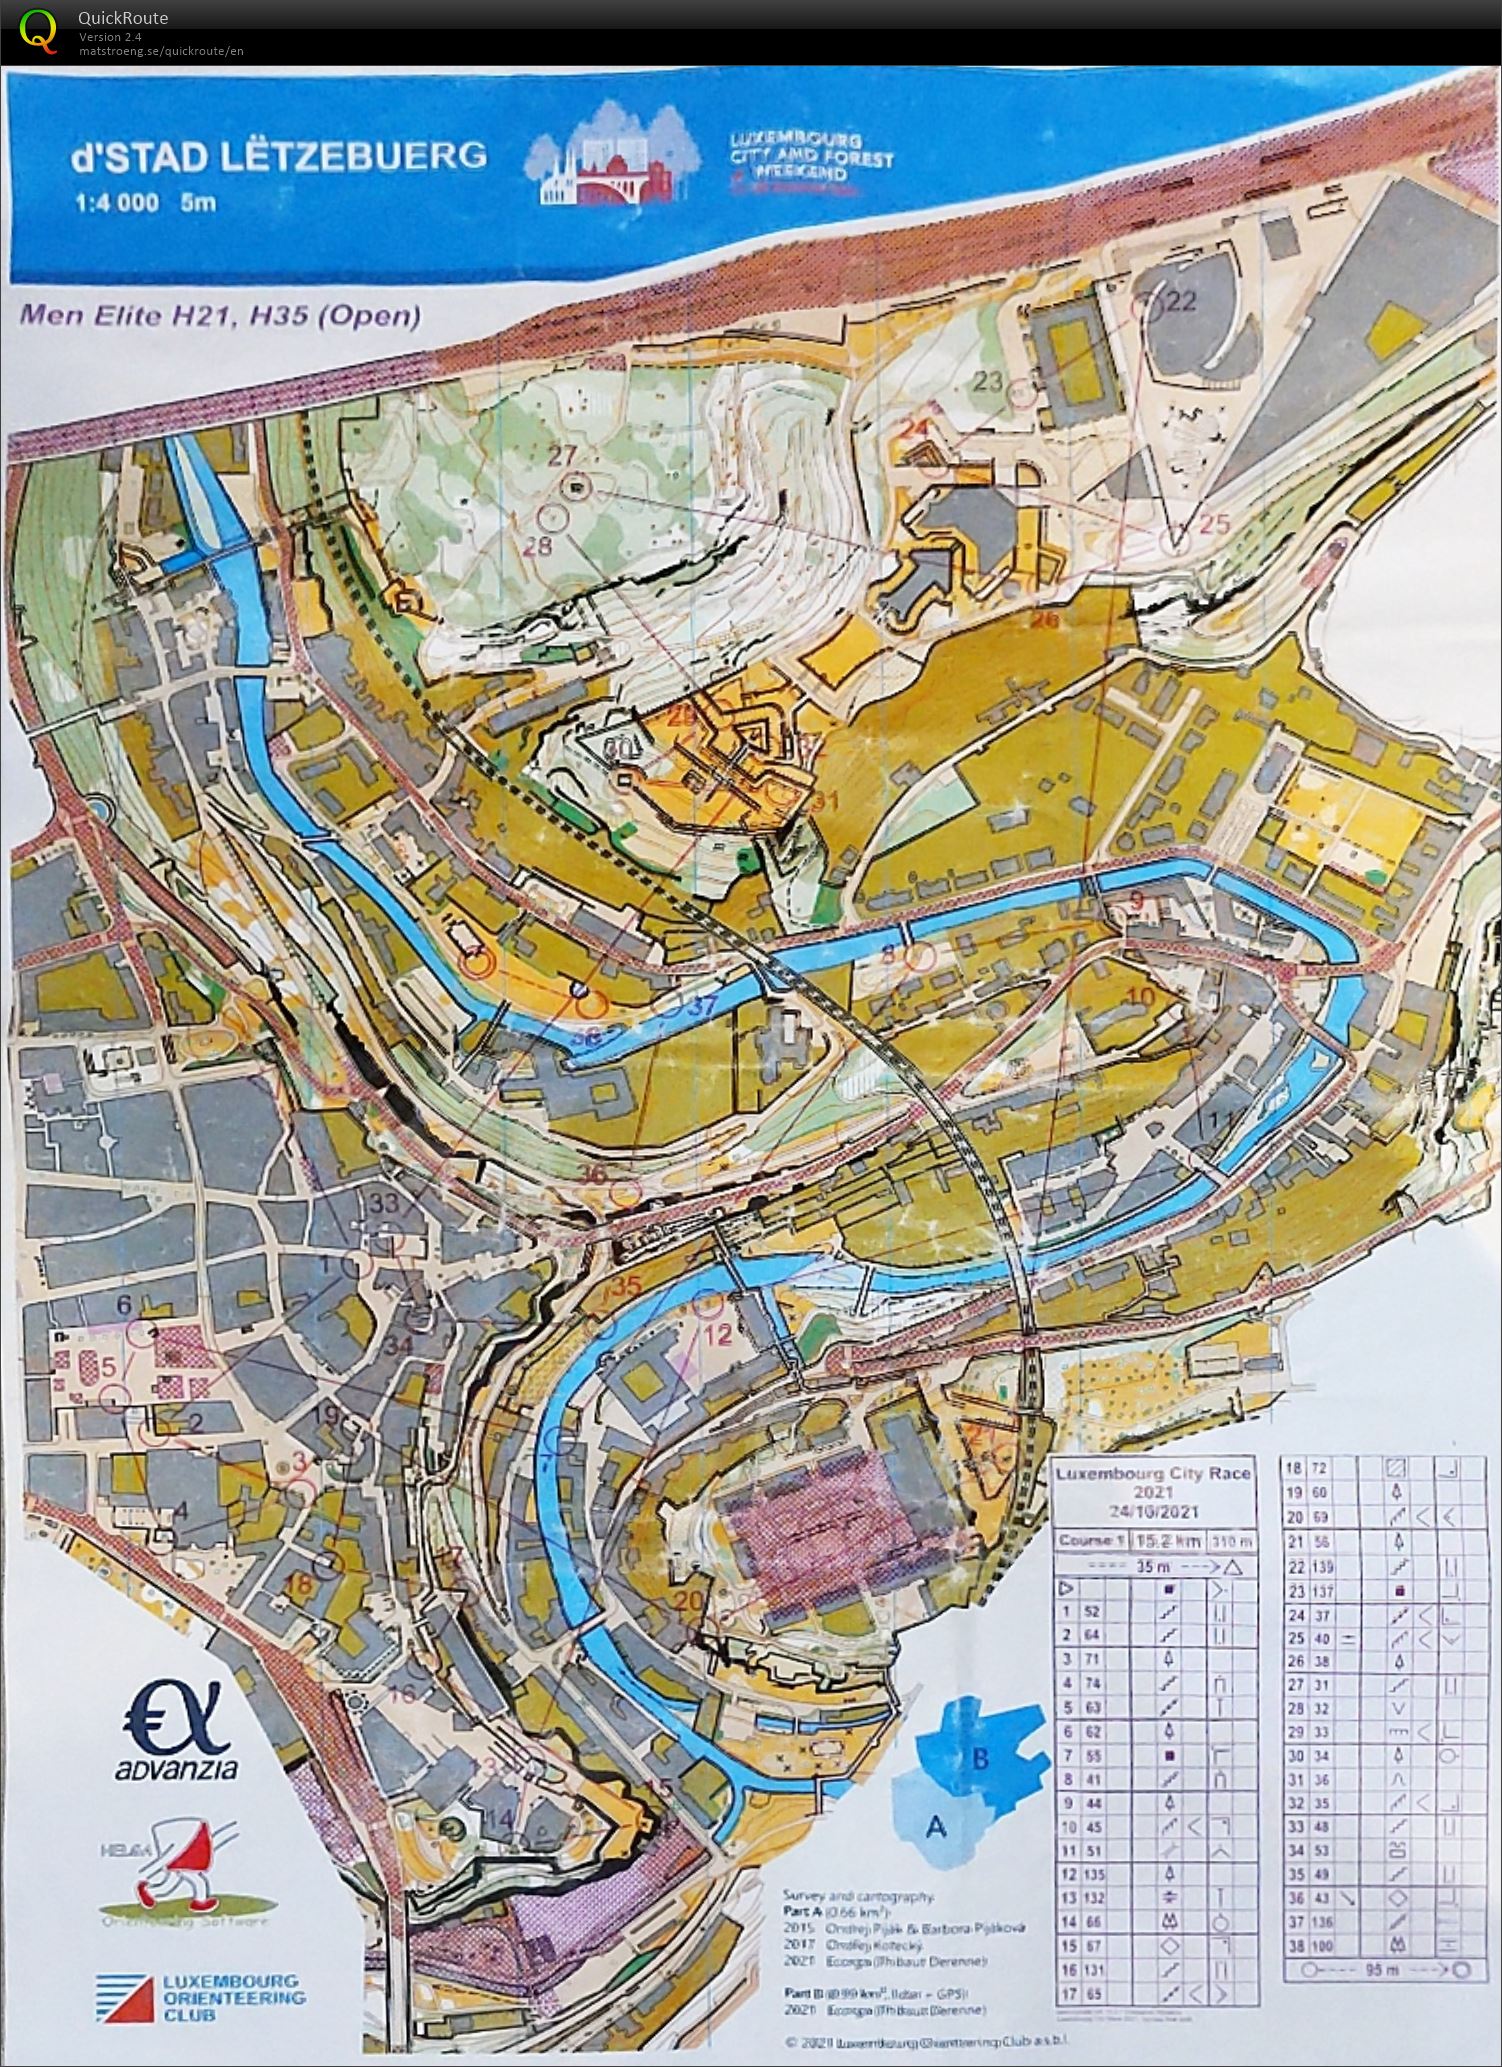 Luxembourg City Race (24-10-2021)